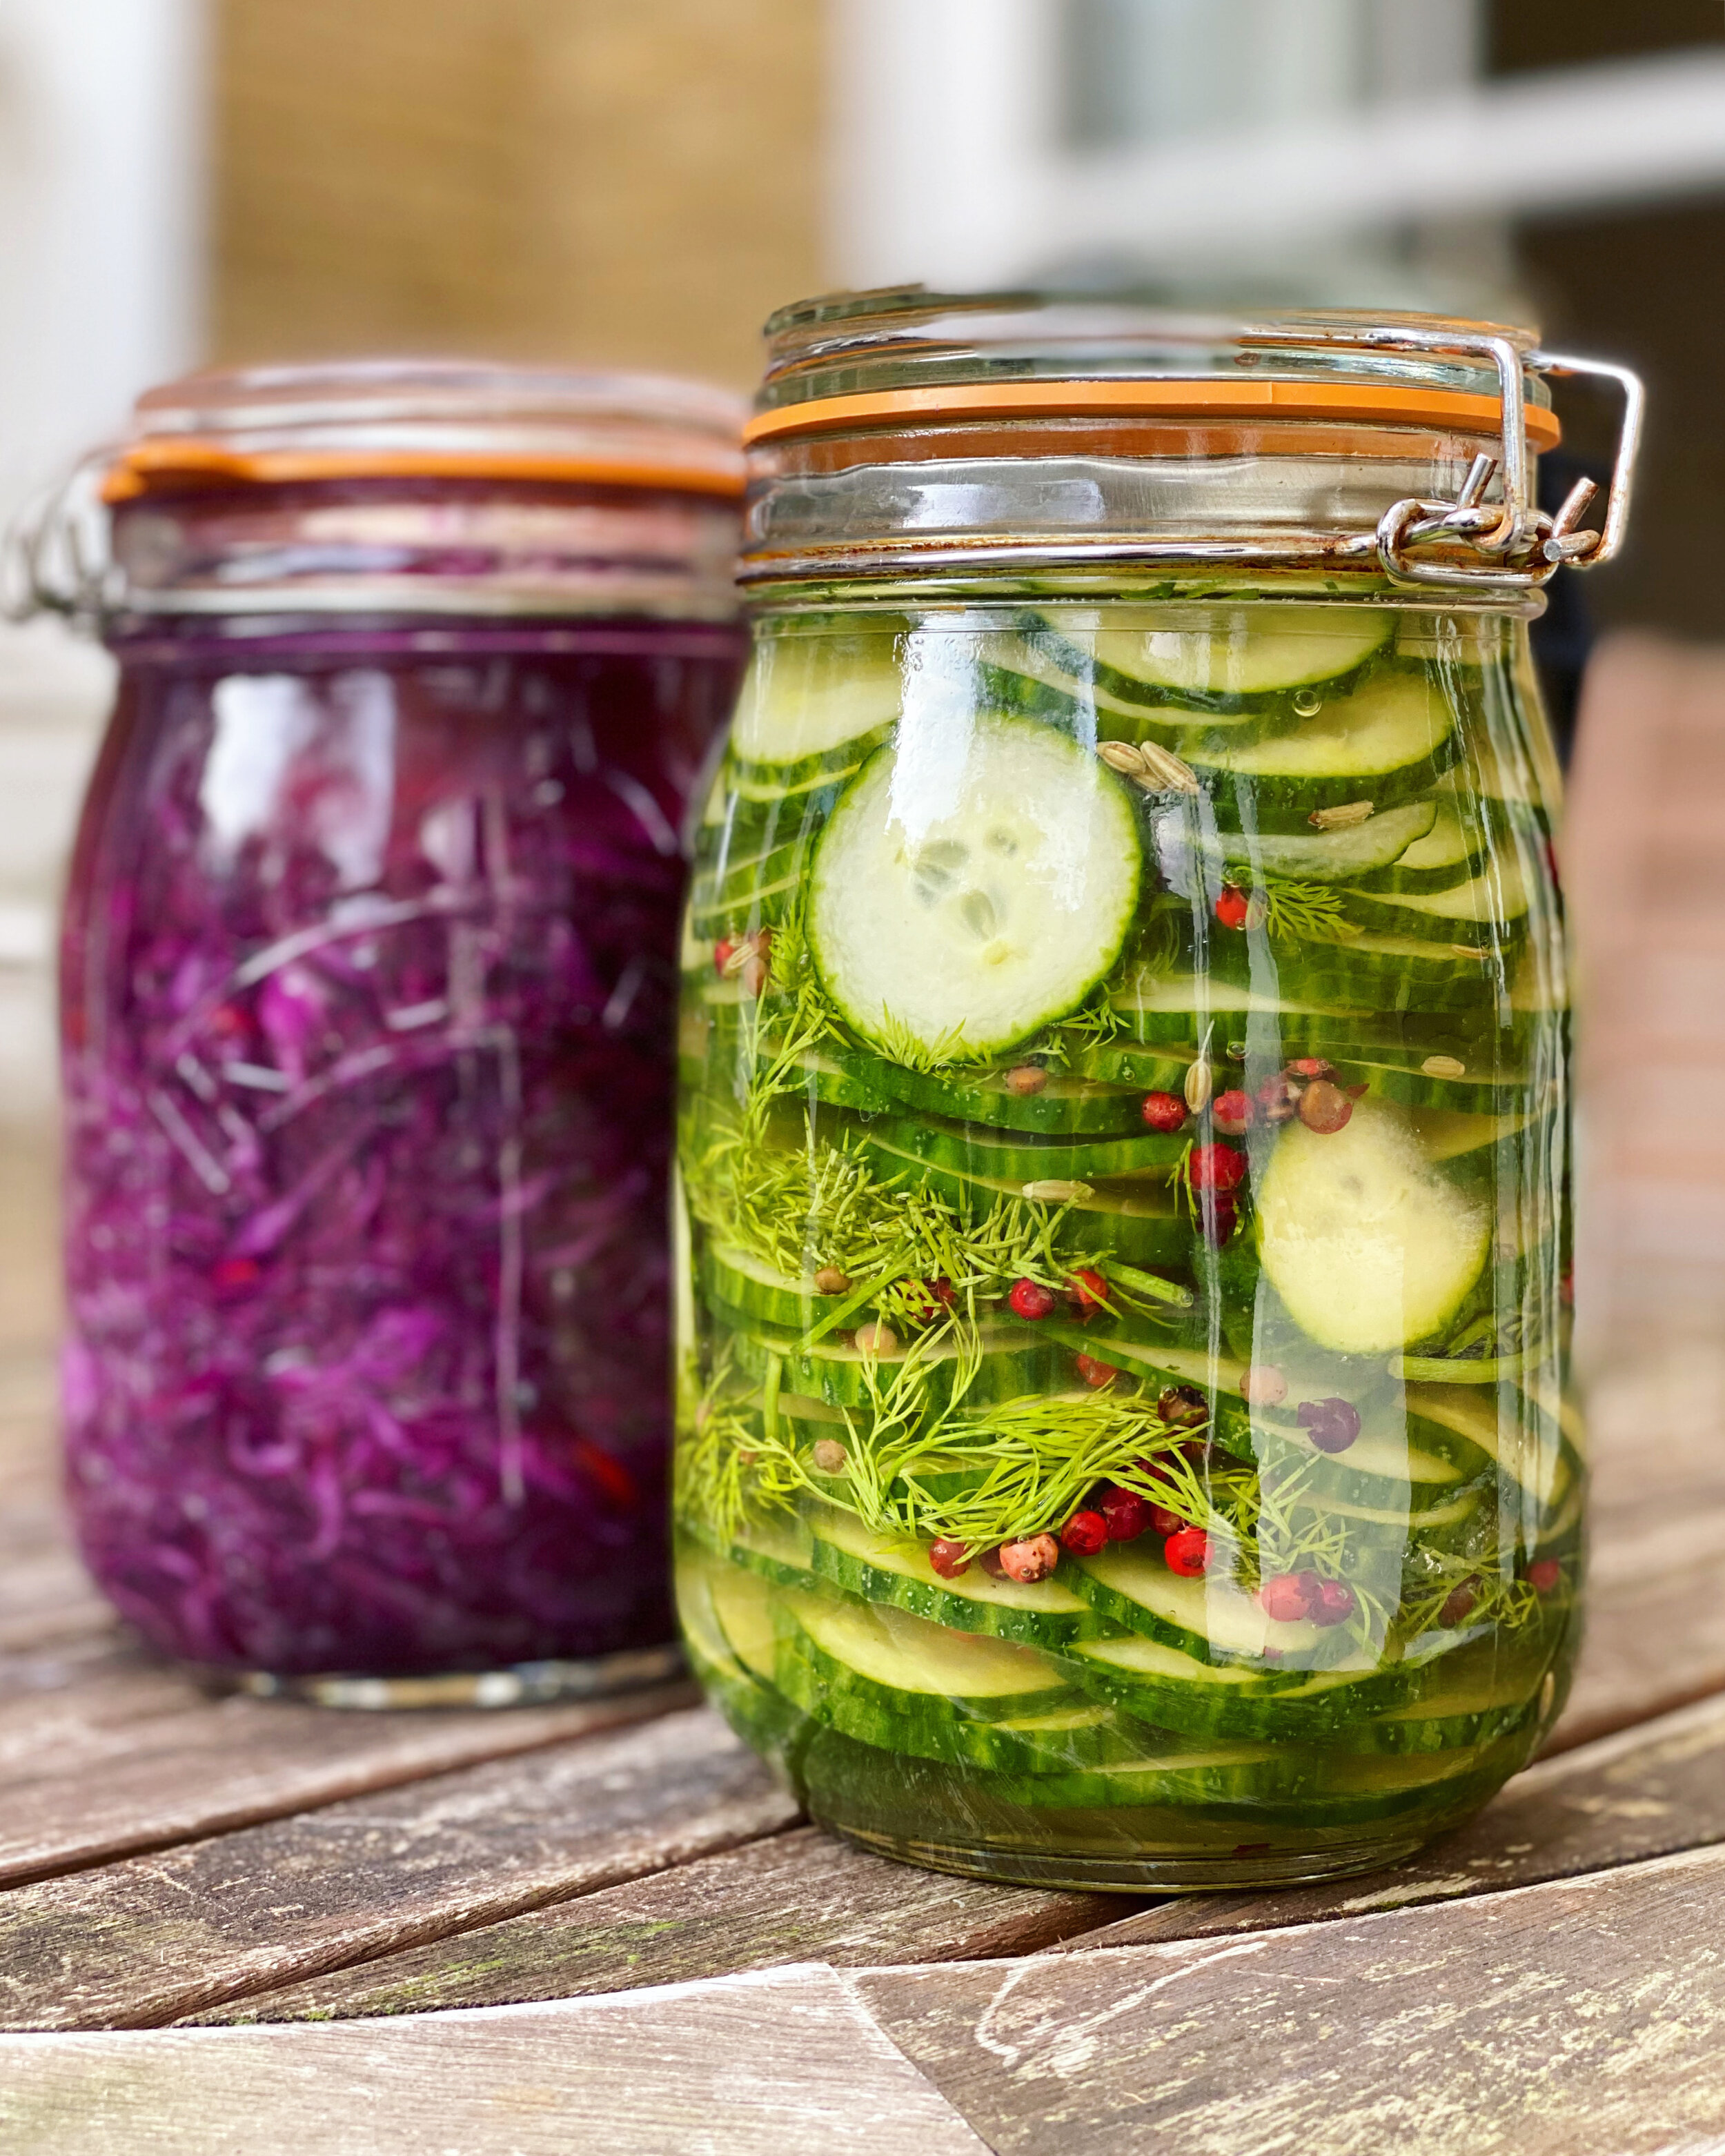 Fermented dill pickles